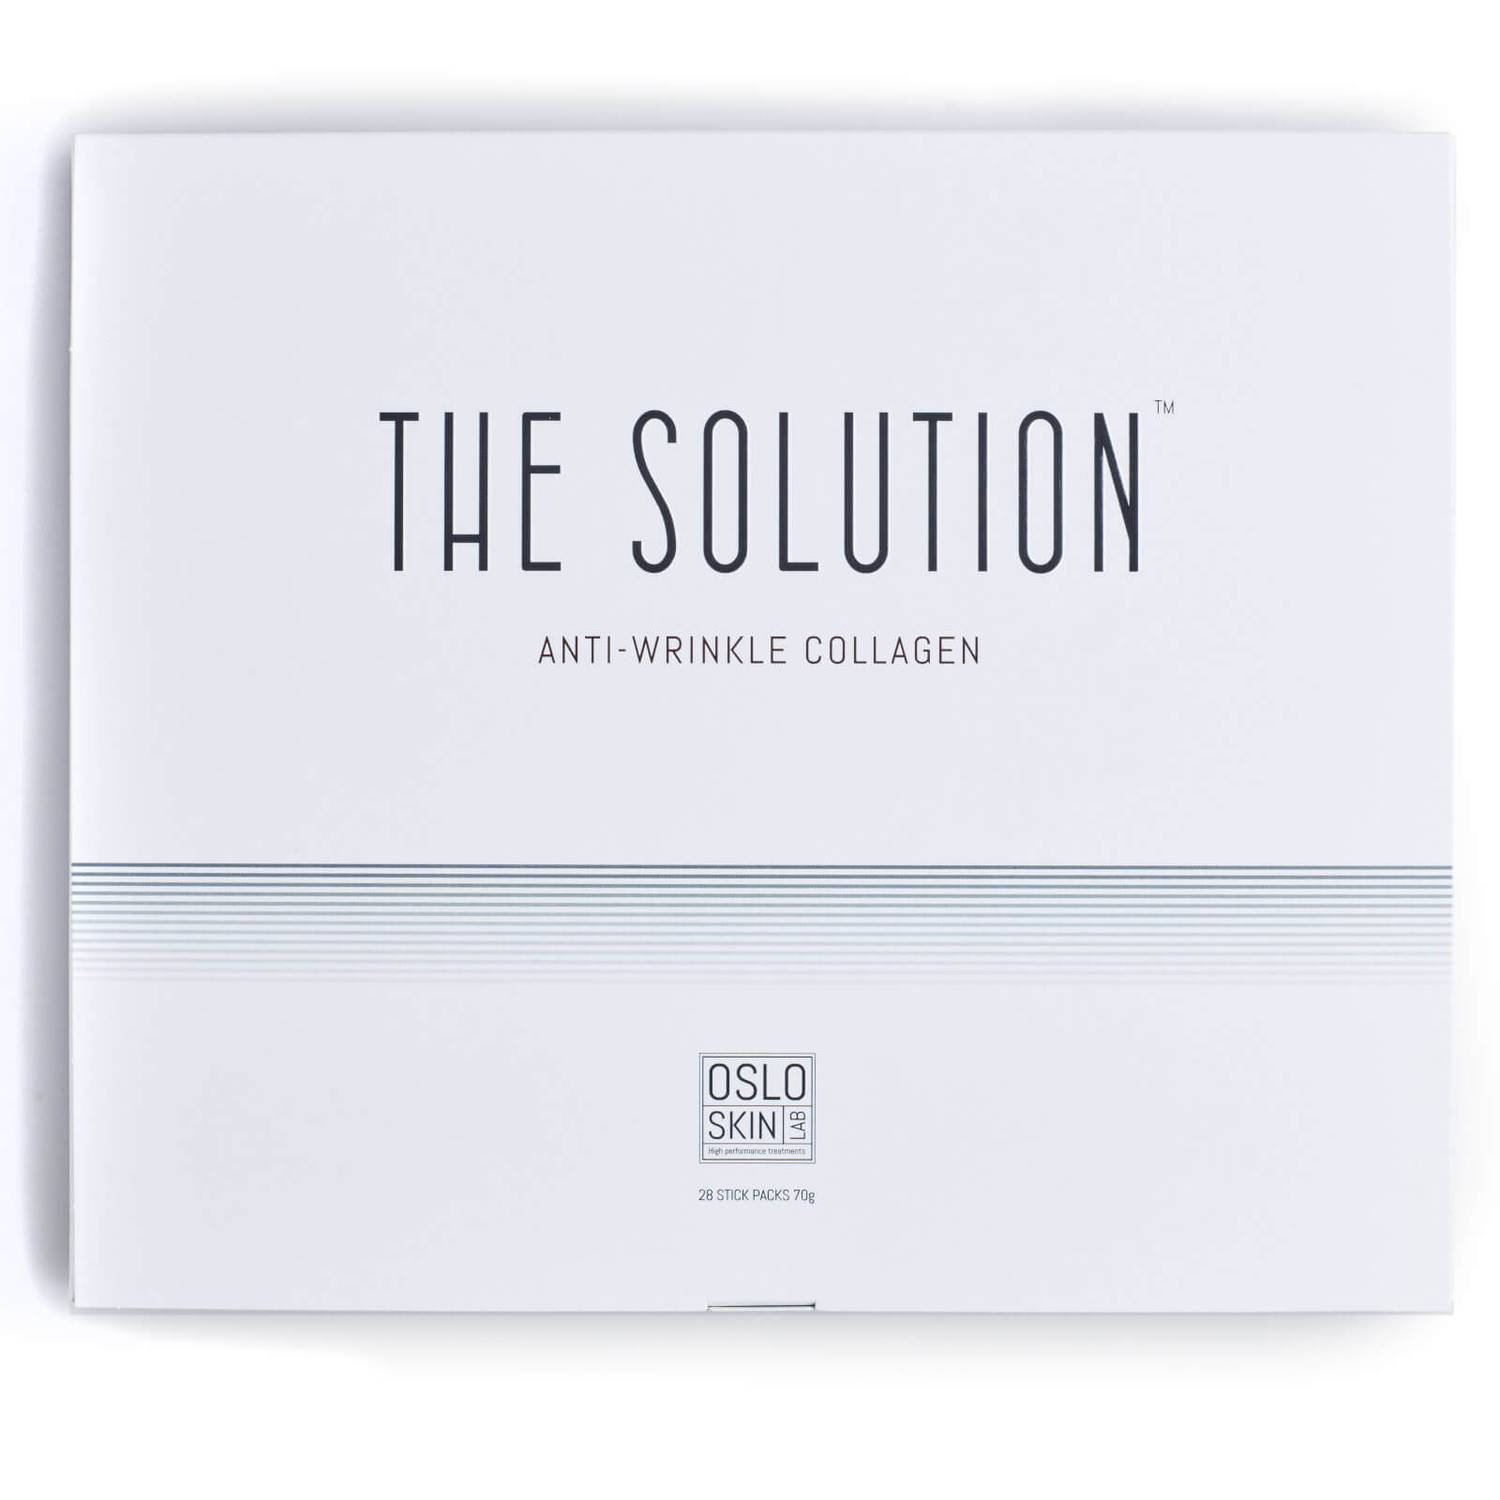 Oslo Skin Lab The Solution